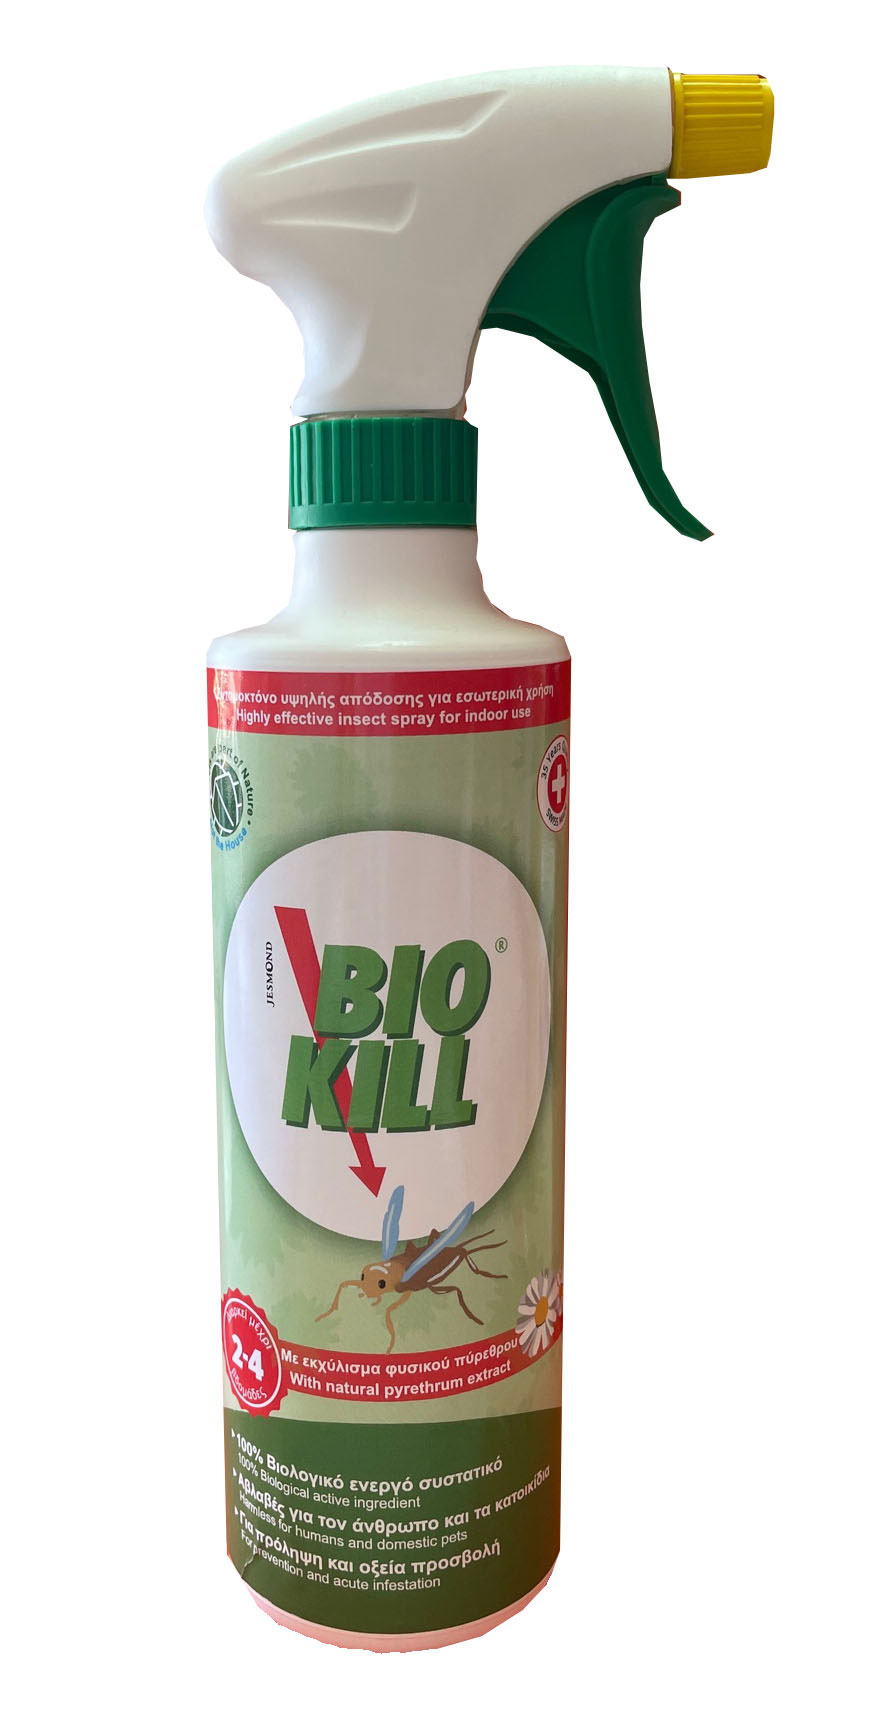 BIOKILL WITH NATURAL PYRETHRUM EXTRACT 375ML